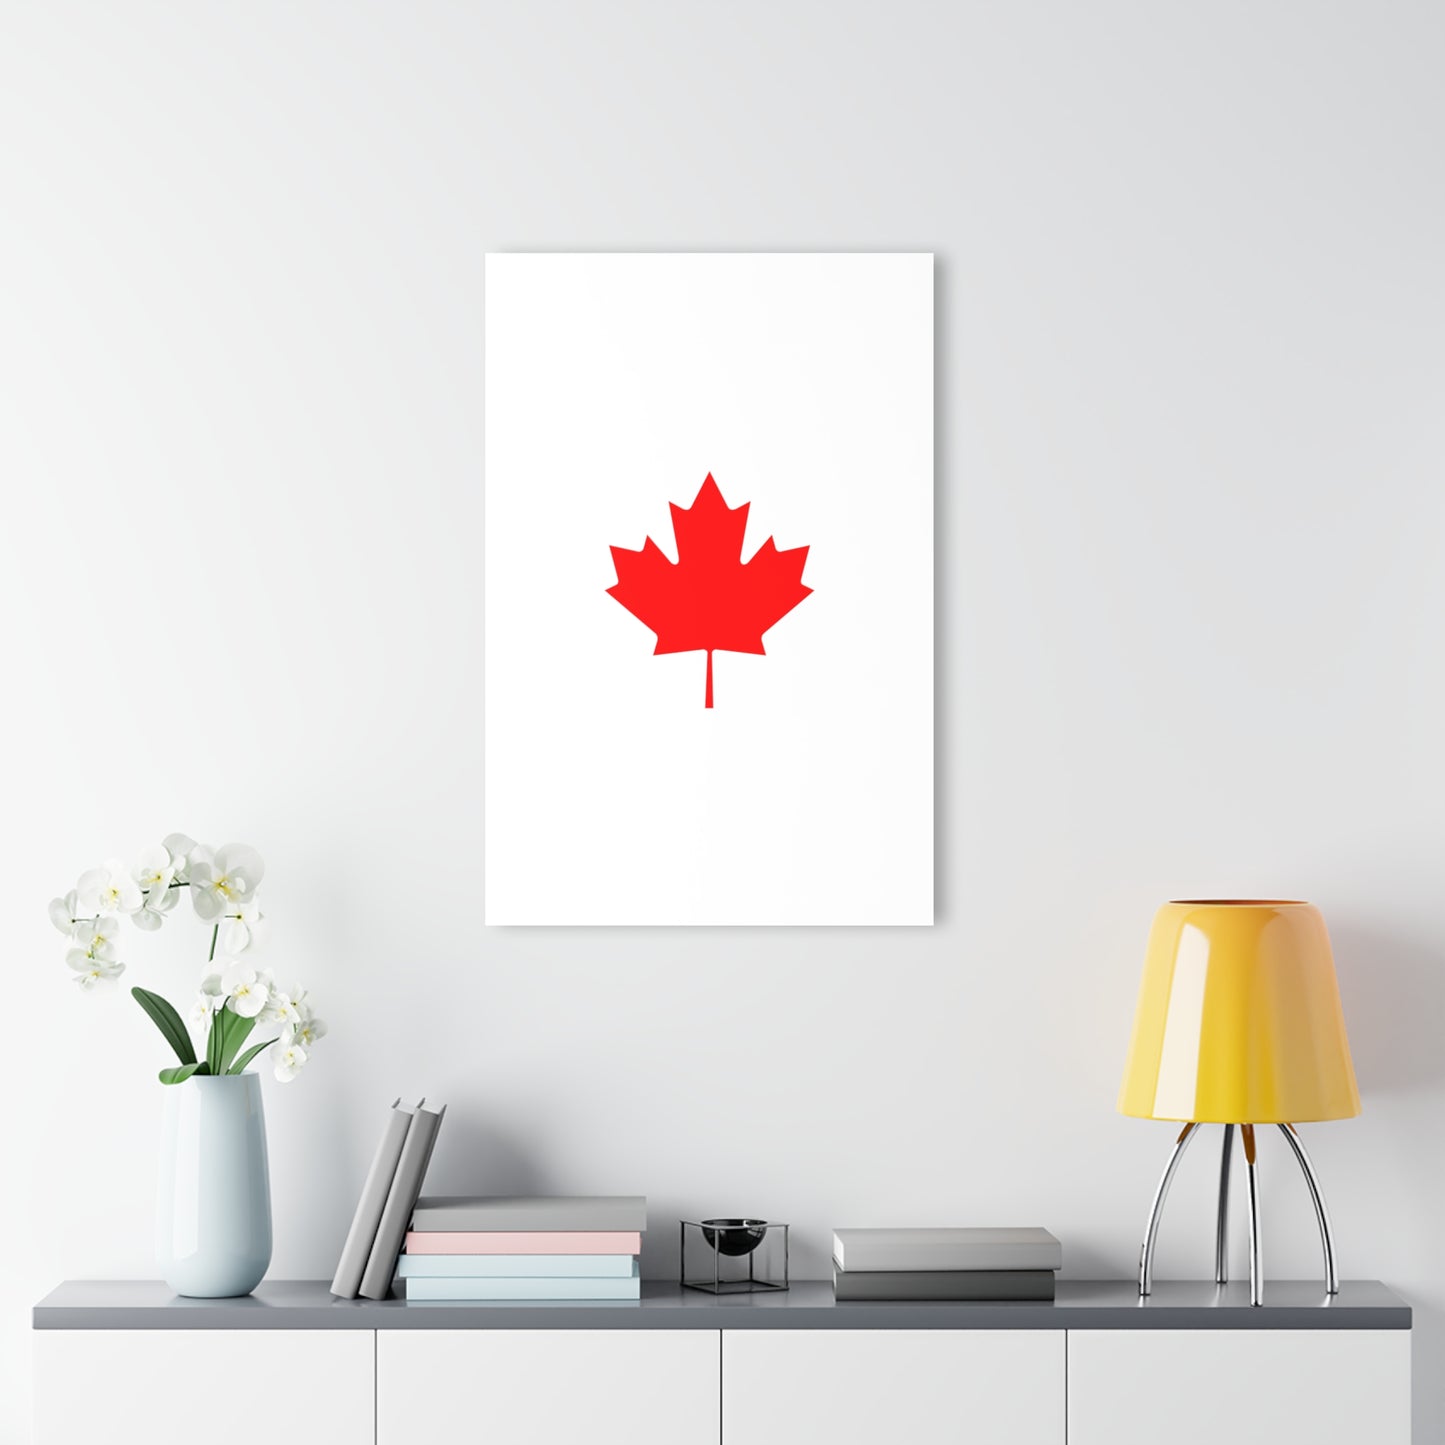 Canadian Maple Leaf, Acrylic Prints (French Cleat Hanging)